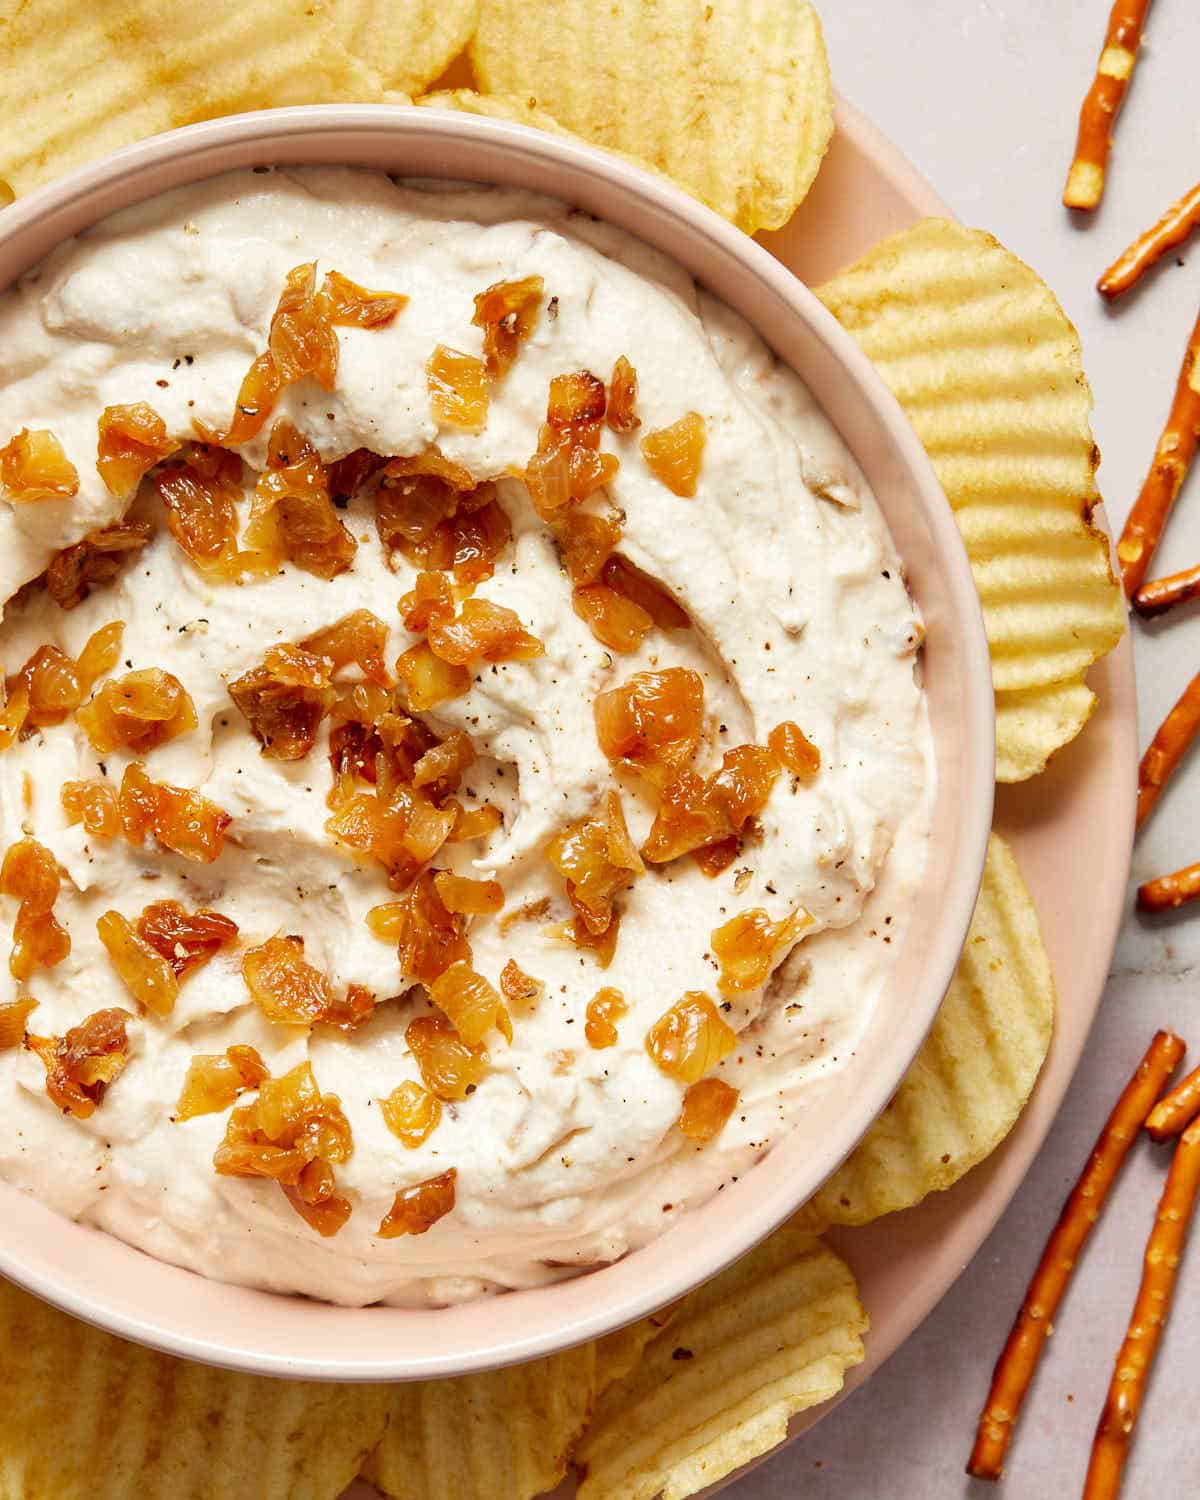 Overhead view of onion dip in a bowl with chips and pretzels on the side.